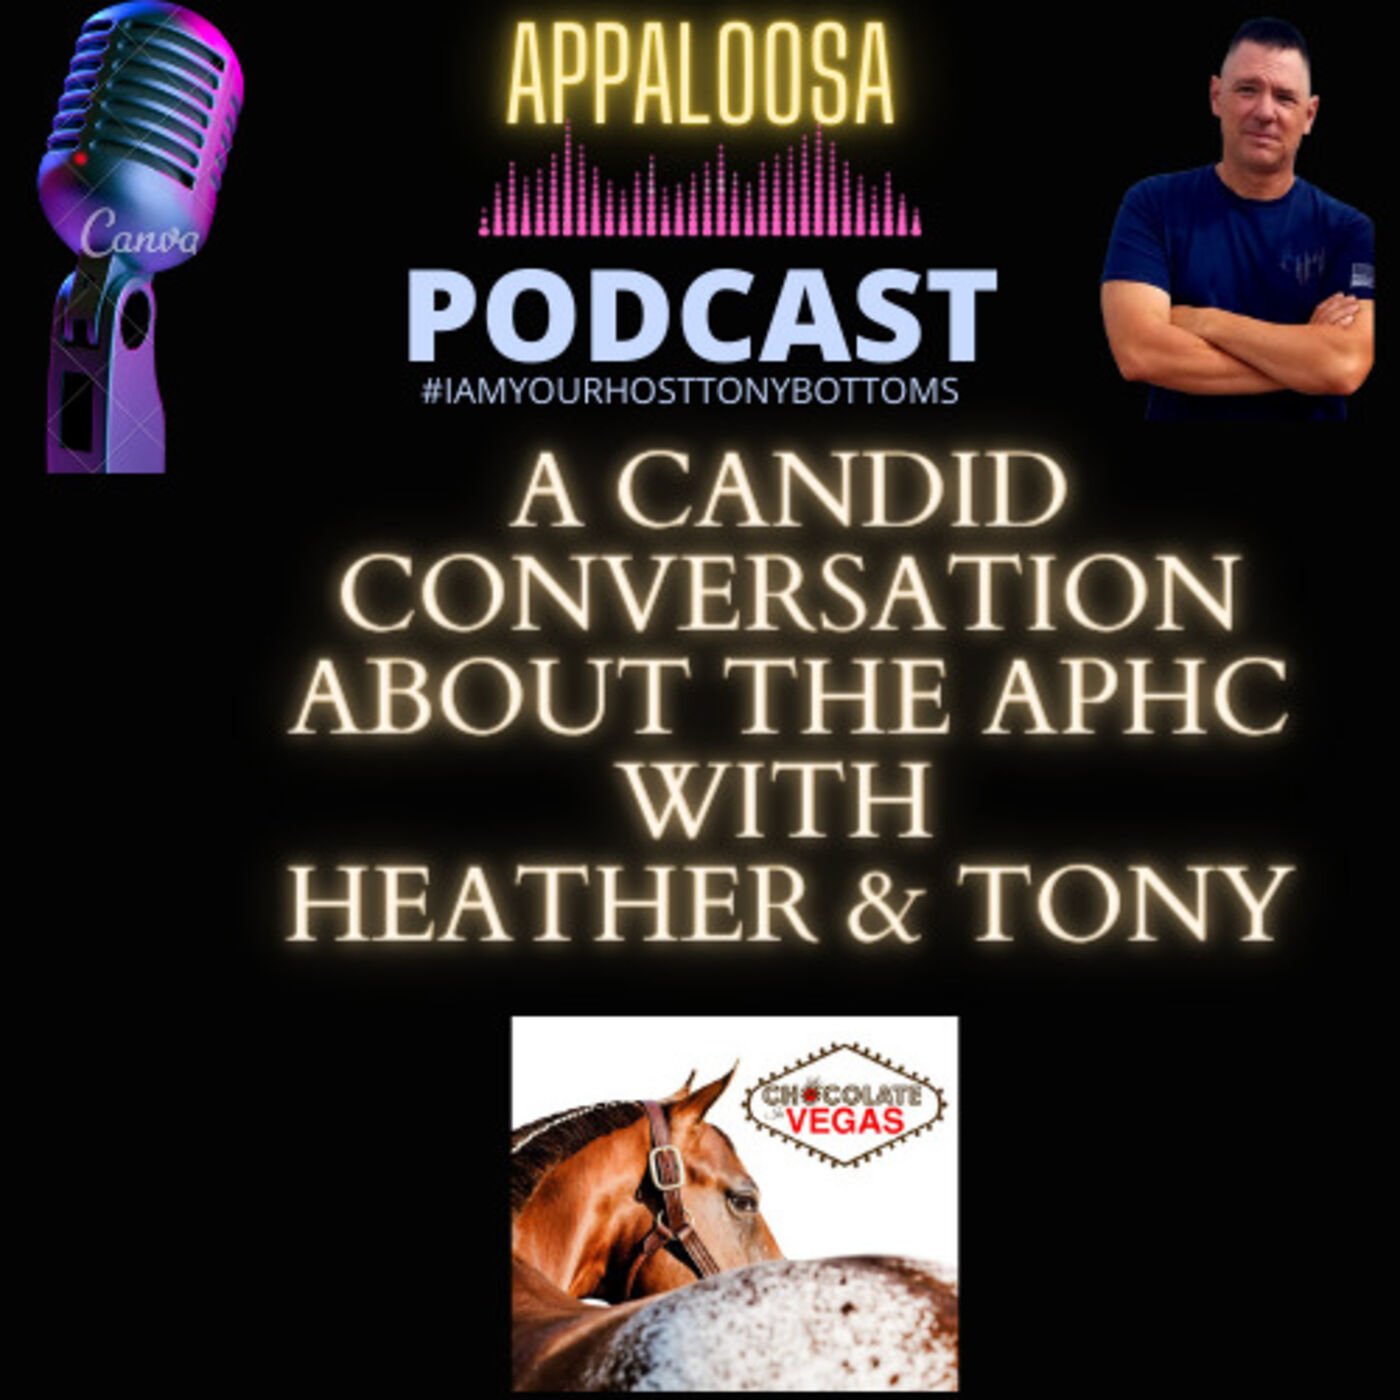 A Candid Conversation About the ApHC with Heather & Tony